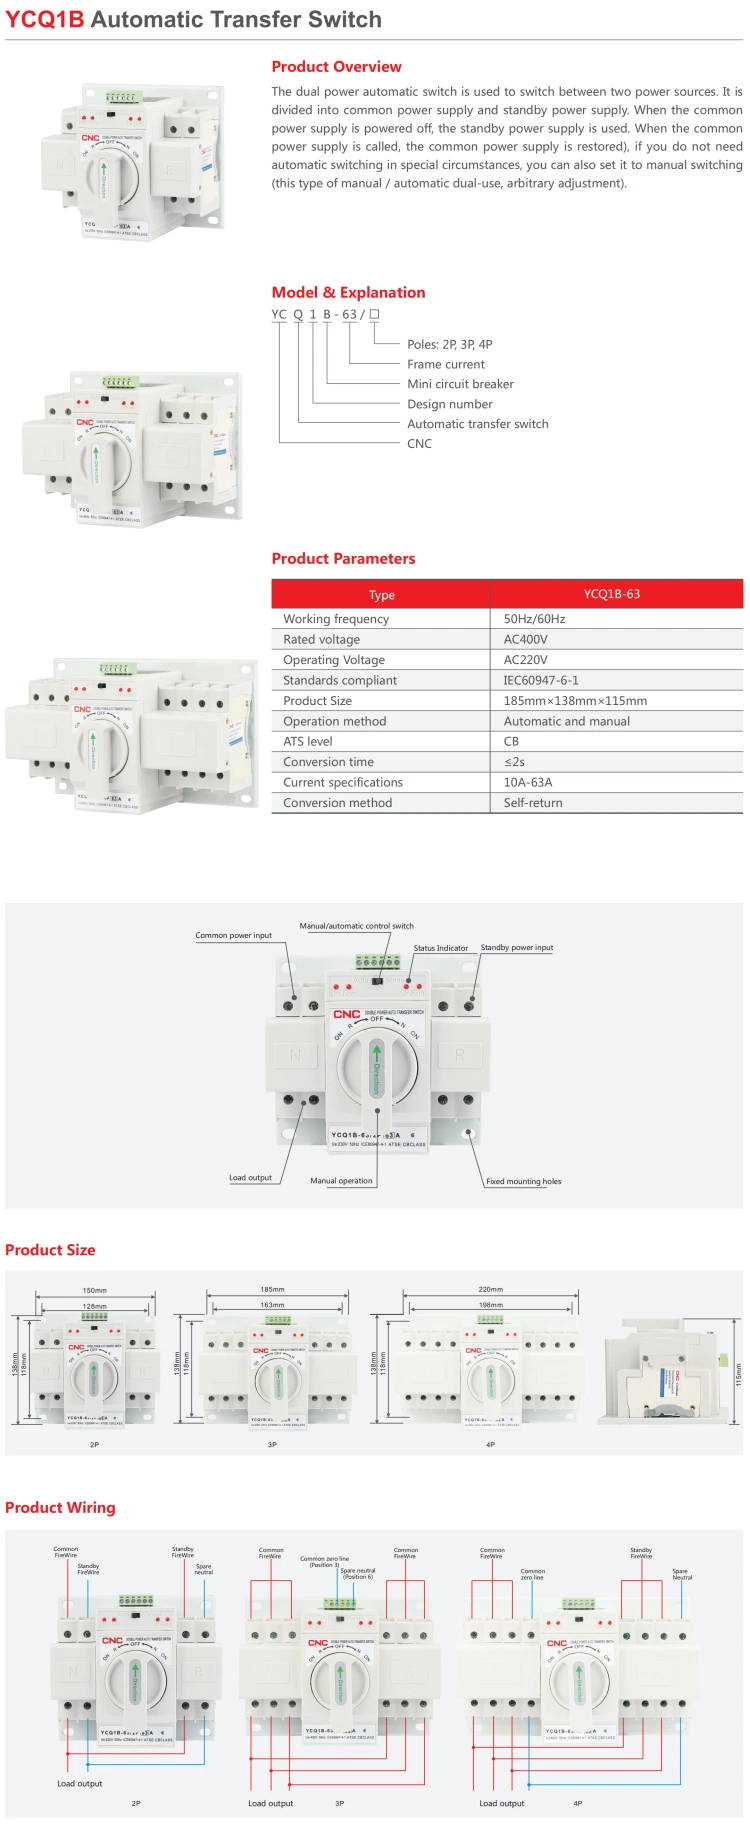 Ycq1b-63 2p Manual Automatic Dual-Use 220V 50Hz ATS Self Return Electric Automatic Transfer Switch